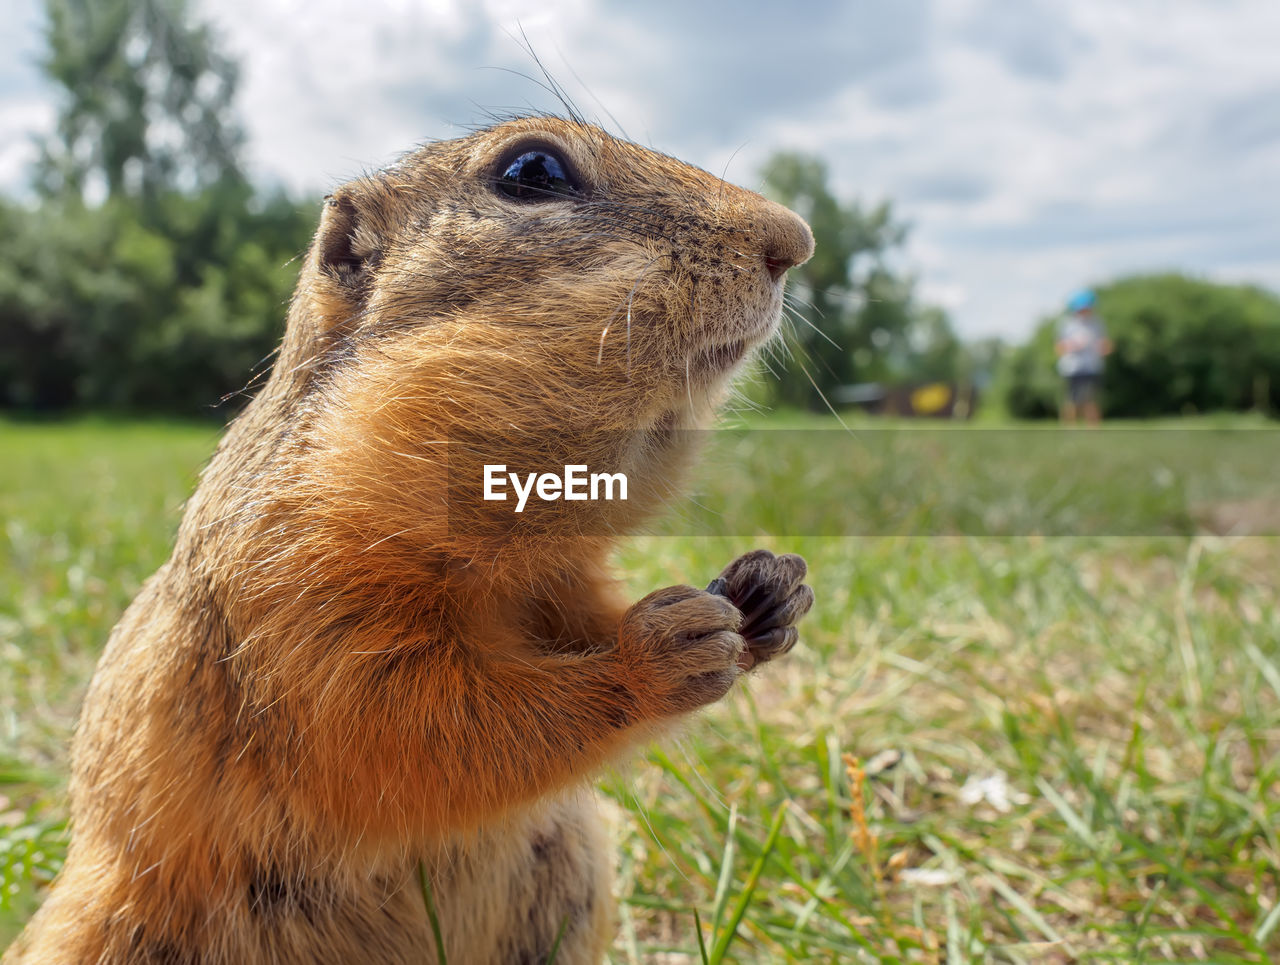 animal themes, animal, mammal, animal wildlife, squirrel, one animal, wildlife, prairie dog, rodent, nature, grass, whiskers, no people, plant, animal body part, close-up, focus on foreground, outdoors, sky, brown, cute, eating, day, land, side view, food